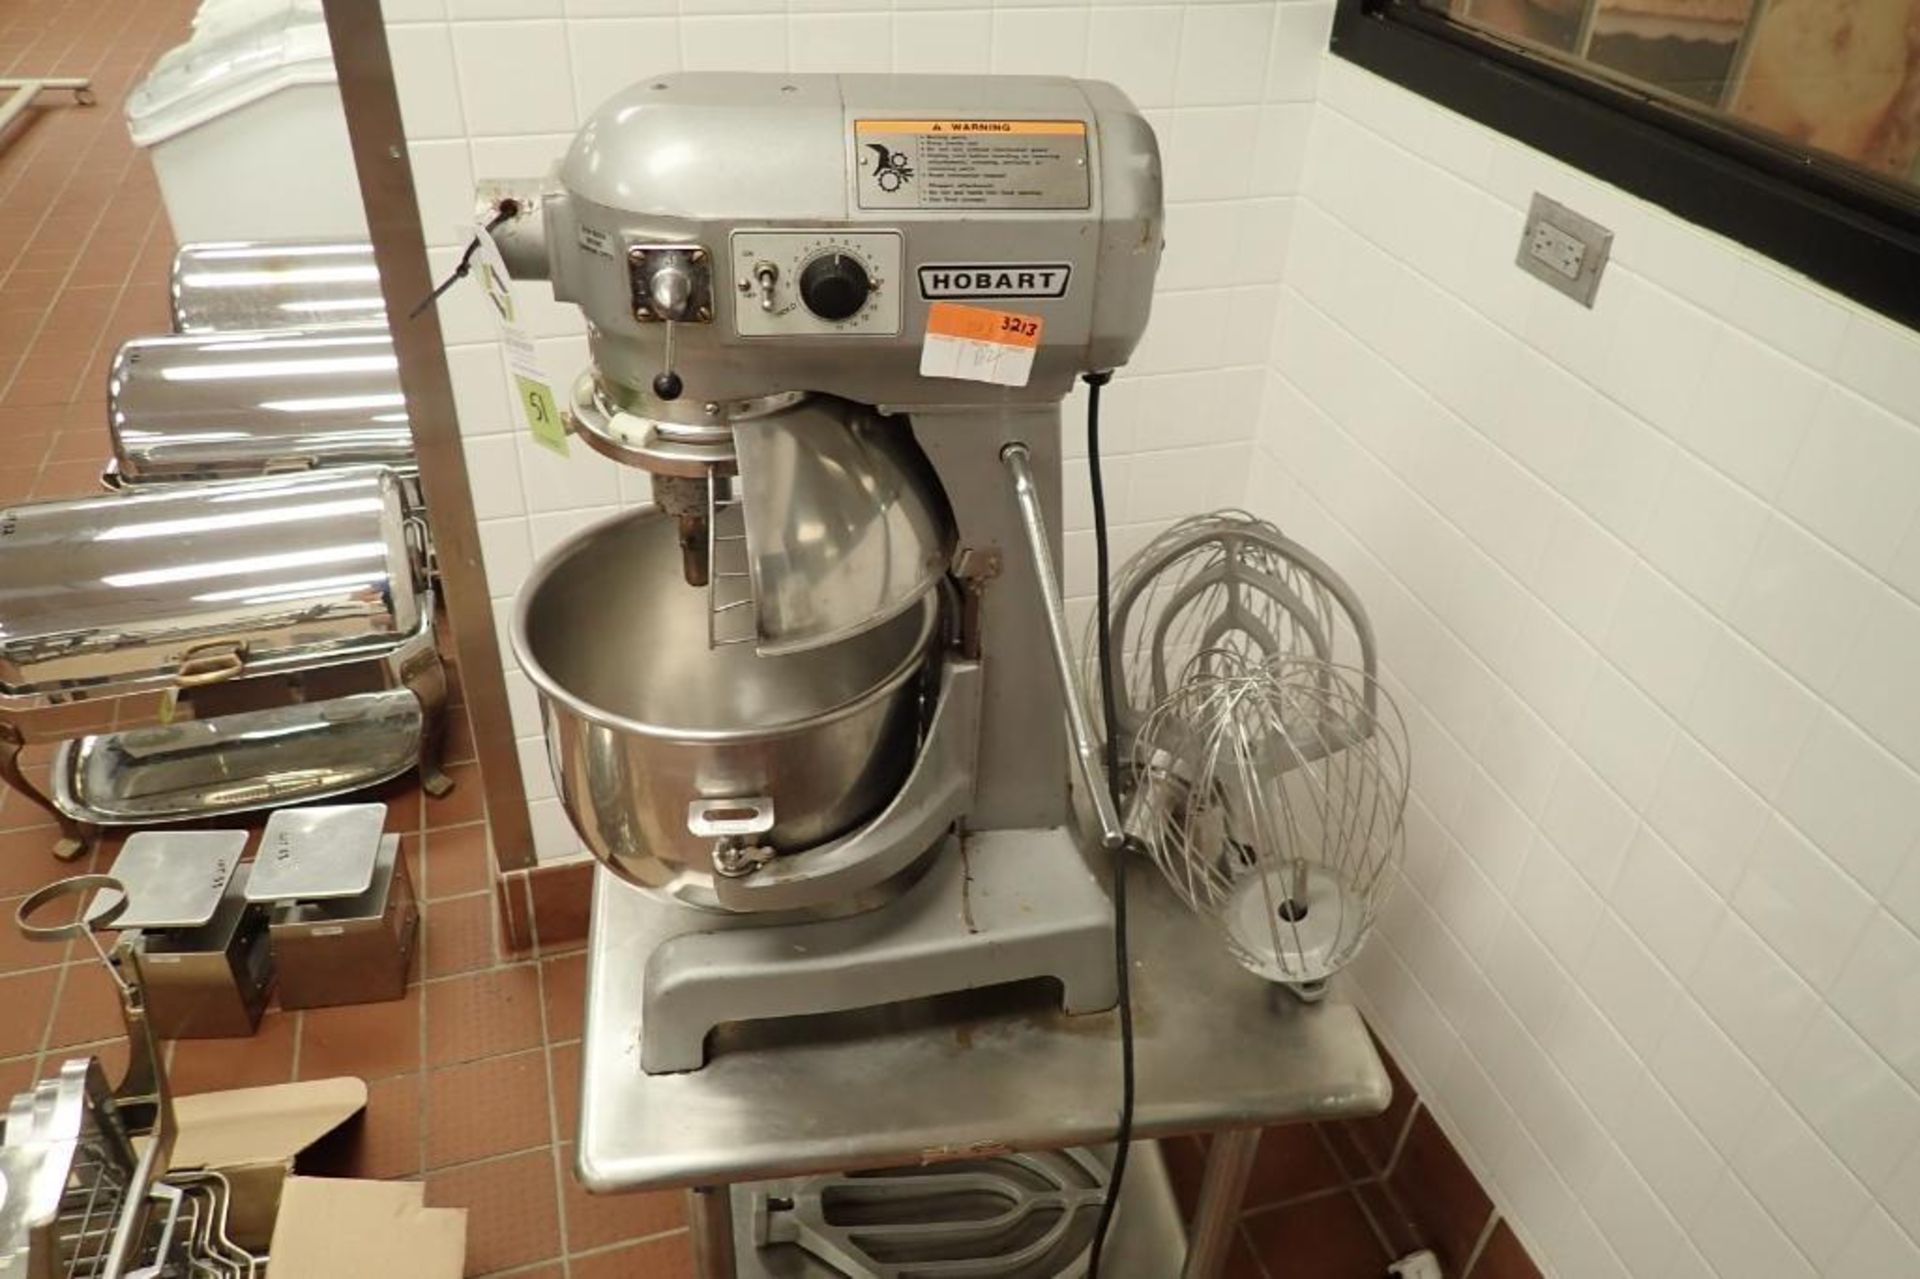 Hobart mixer, Model A200T, SN 31-1199-789, with (3) whisks, (2) paddles, grinder head, SS bowl, with - Image 2 of 12